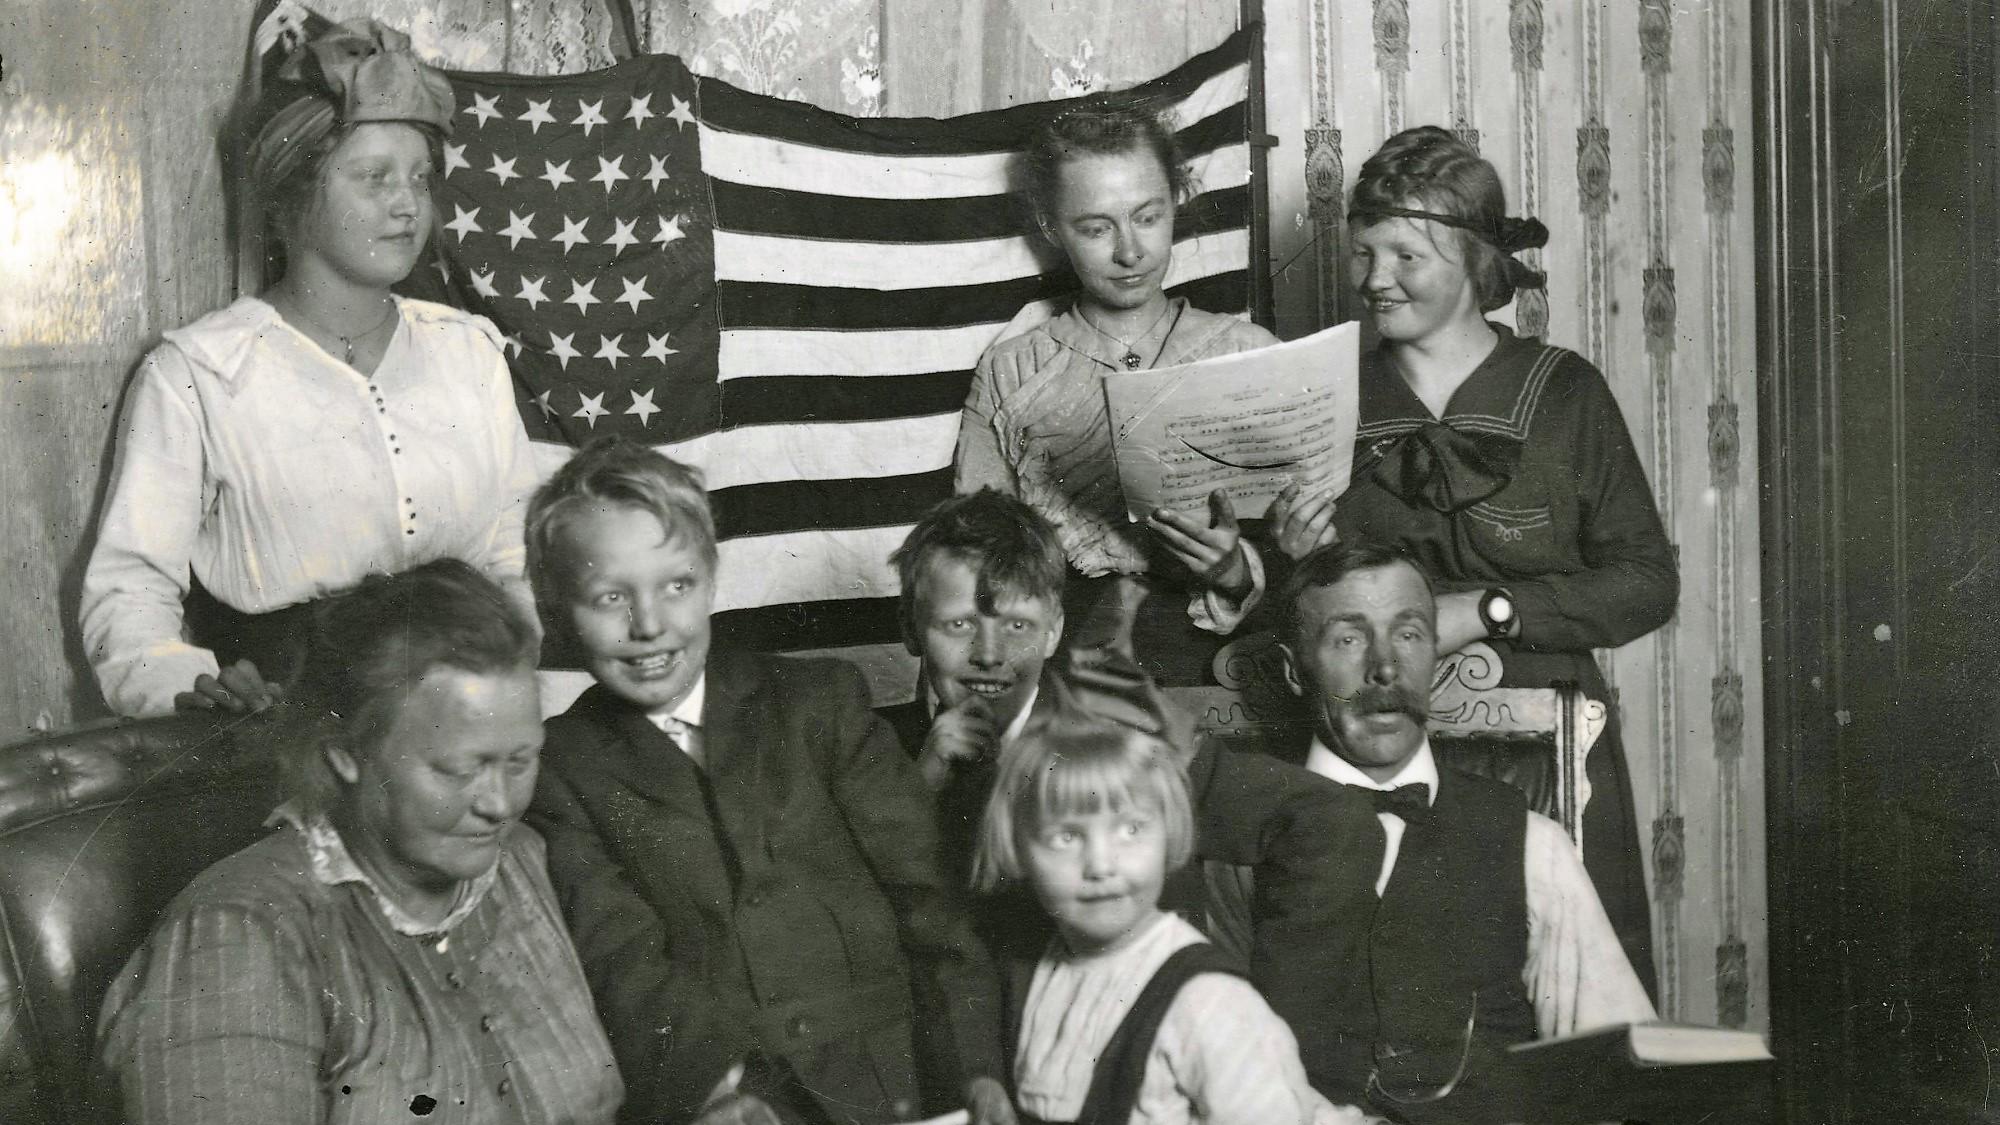 Swenson family members in front of an American flag